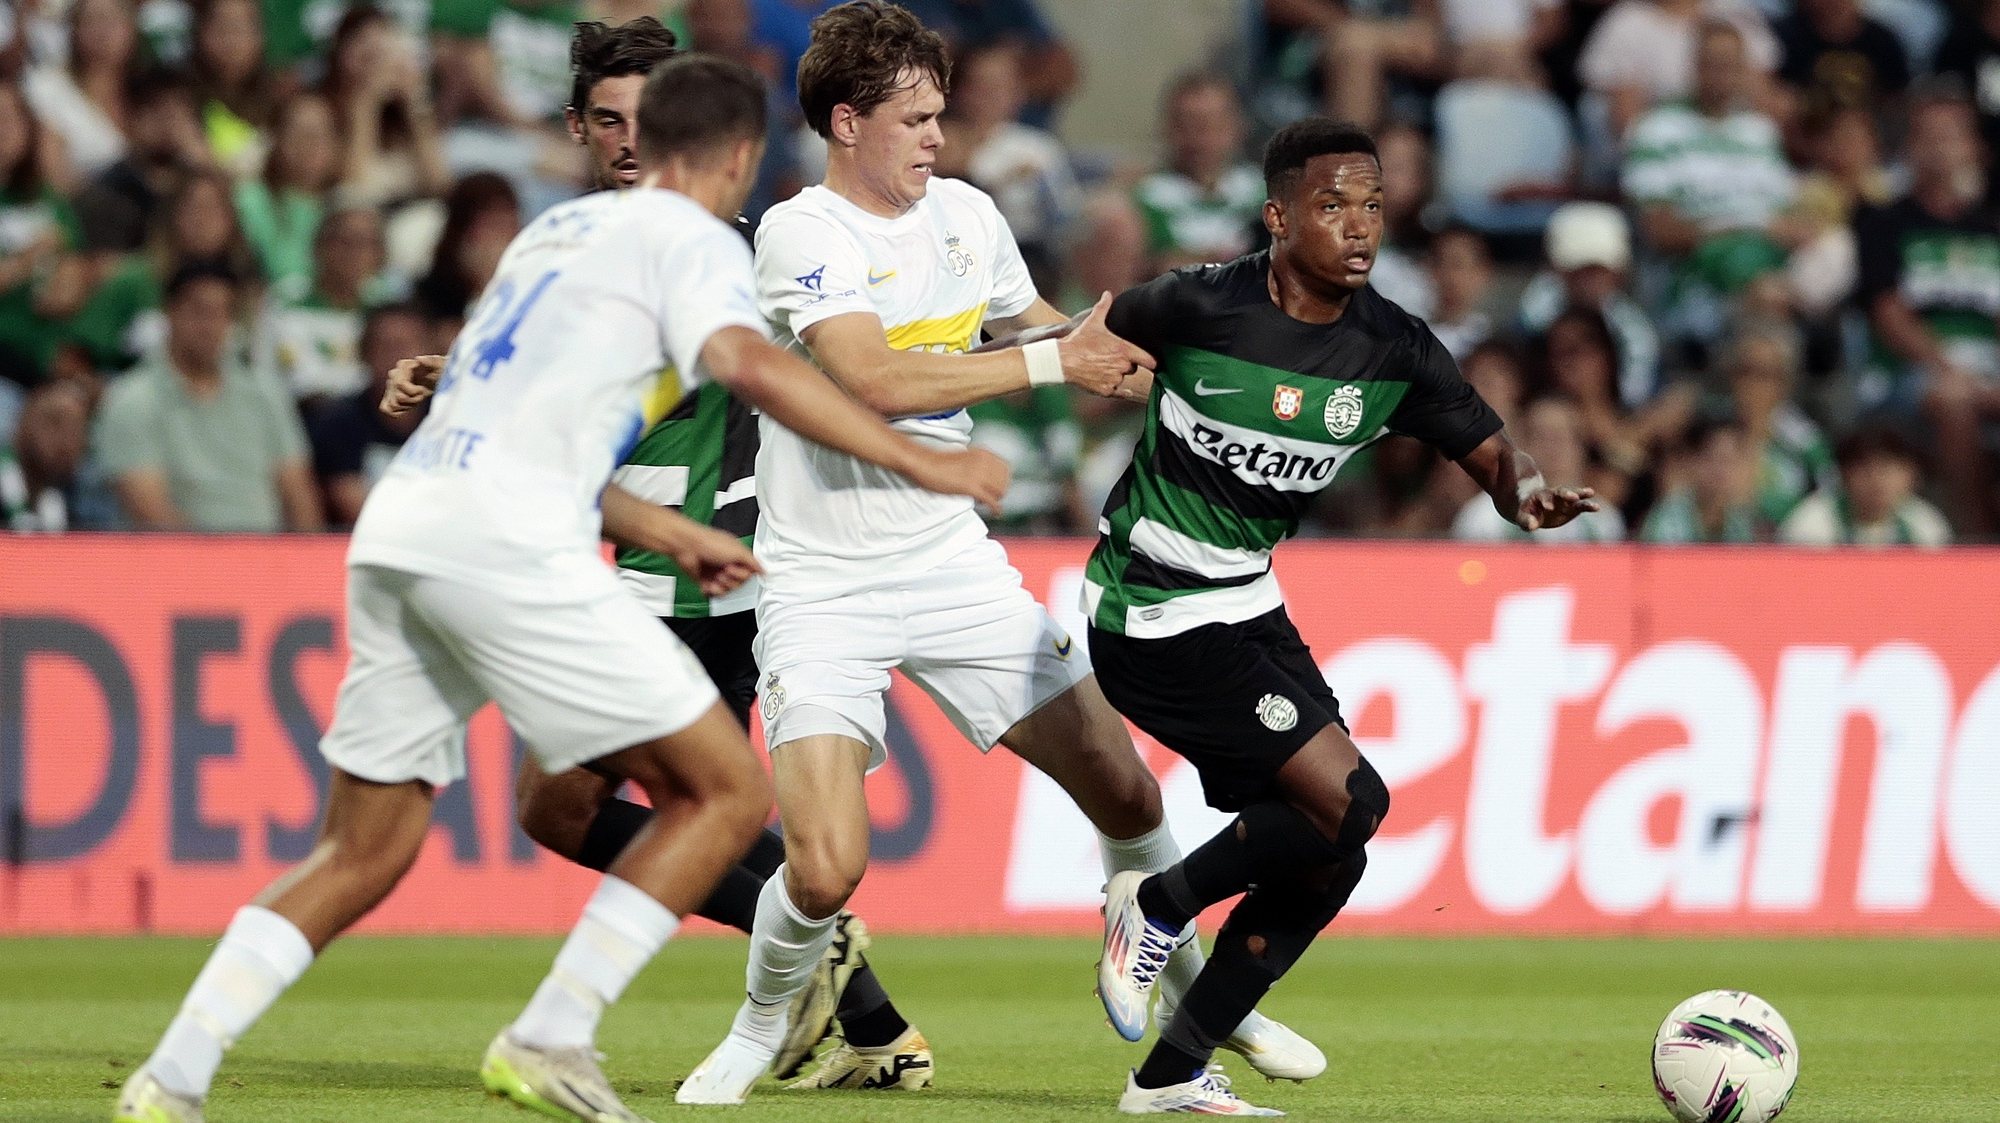 Sporting`s Geny Catamo (R) fights for the ball with Union Saint-Gilloise`s Terho during a match to prepare for the Portuguese First League soccer held at Algarve stadium in Loule, Portugal, 17 July 2024. LUIS BRANCA/LUSA